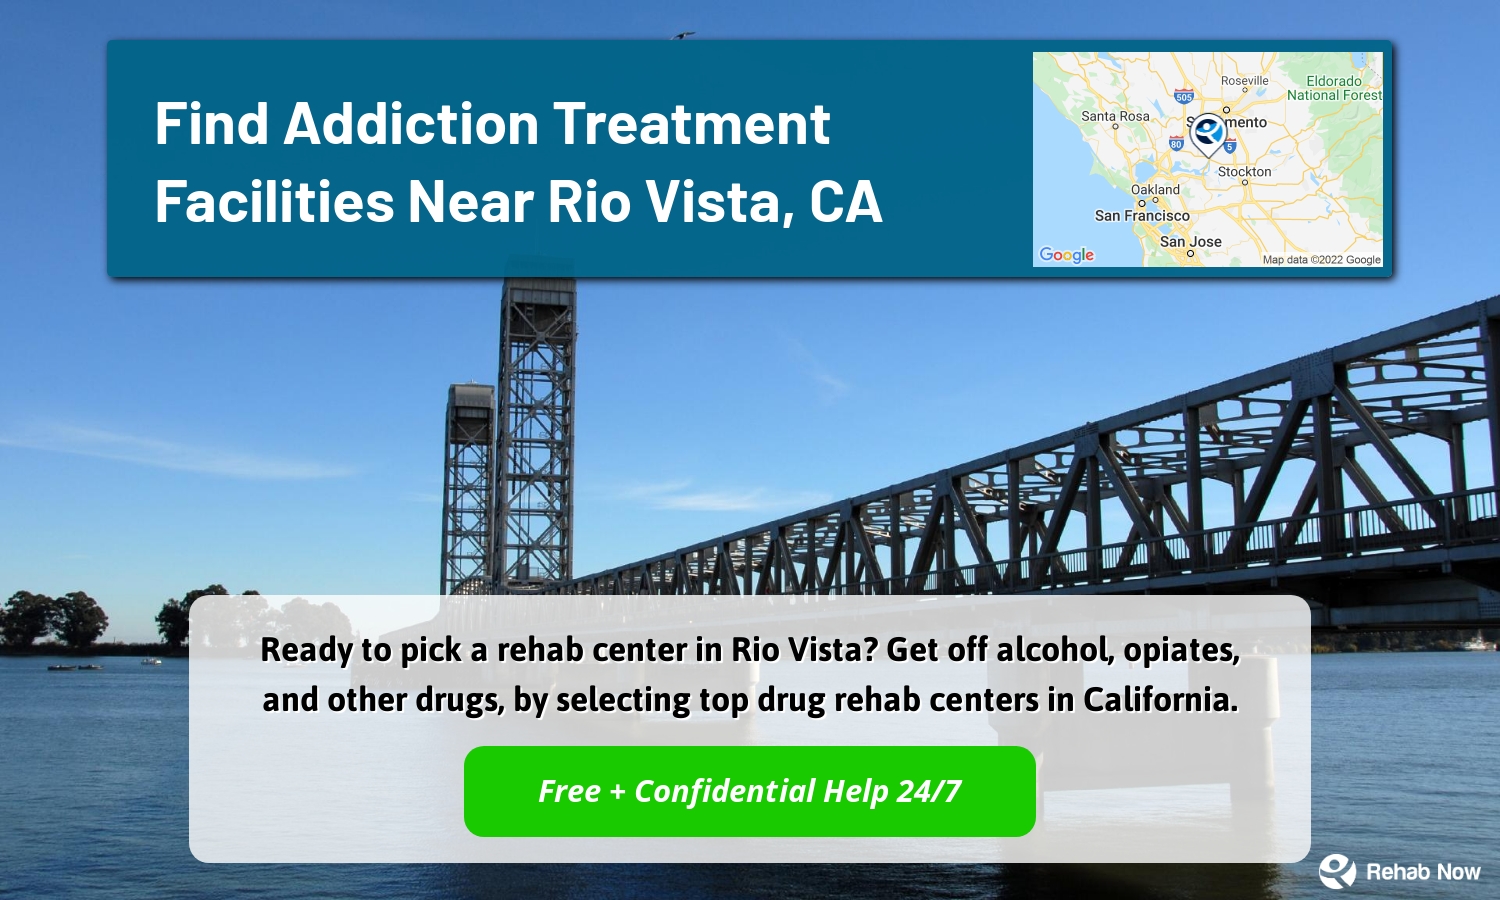 Ready to pick a rehab center in Rio Vista? Get off alcohol, opiates, and other drugs, by selecting top drug rehab centers in California.